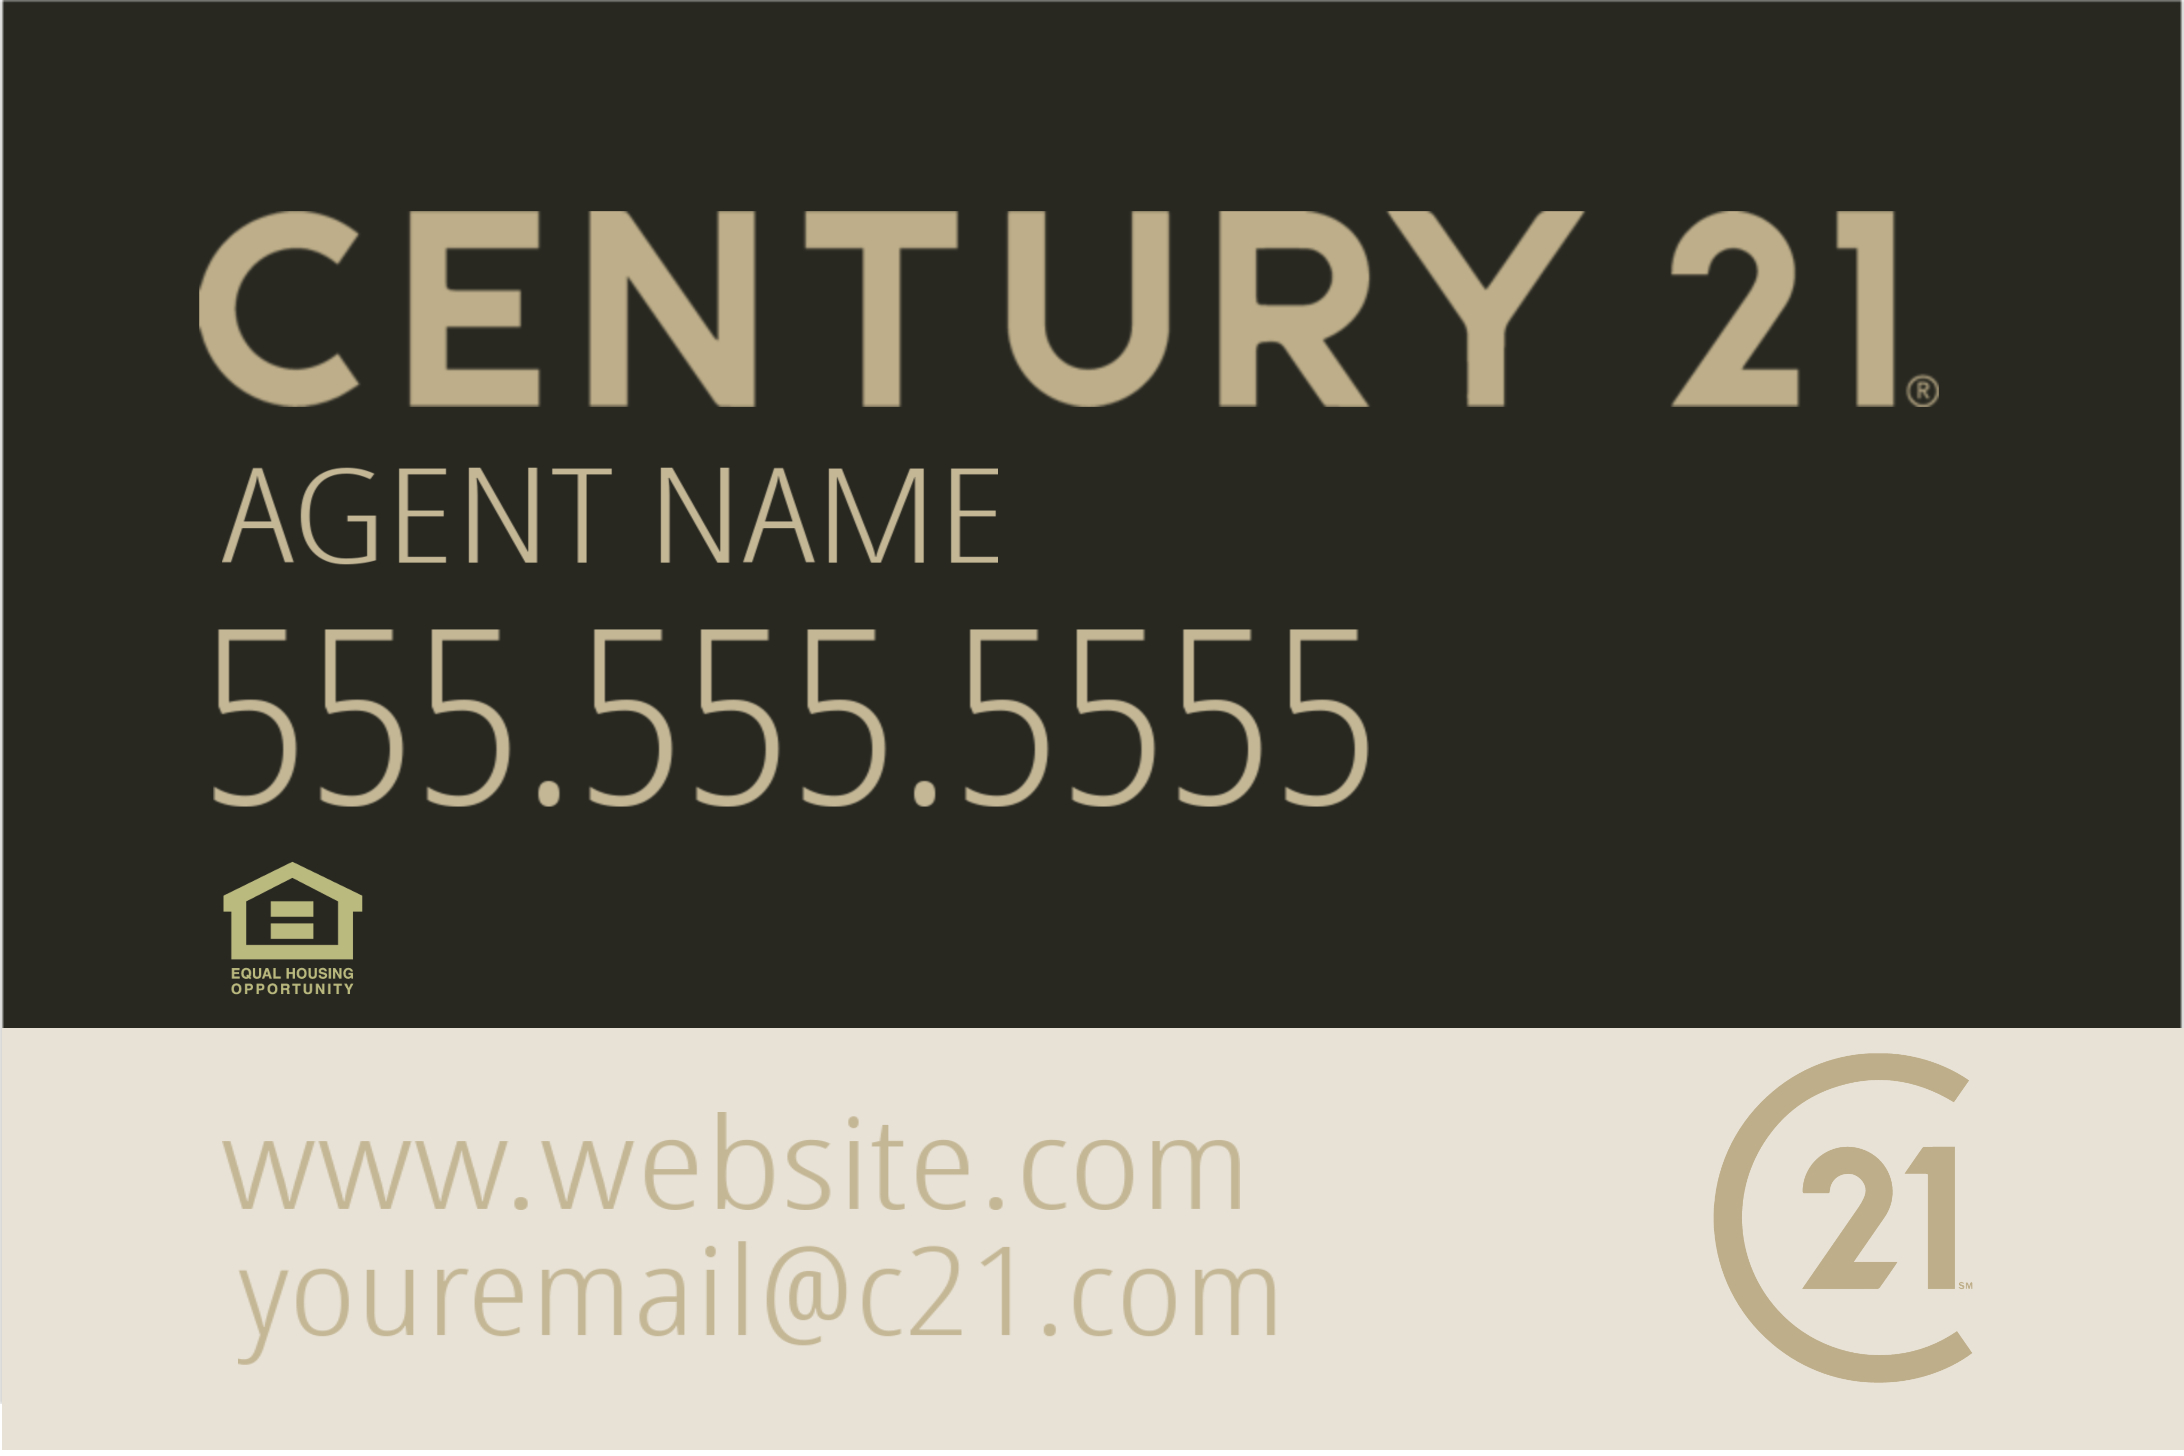 Real Estate Sign, Century 21 Franchisee, 20" x 30"